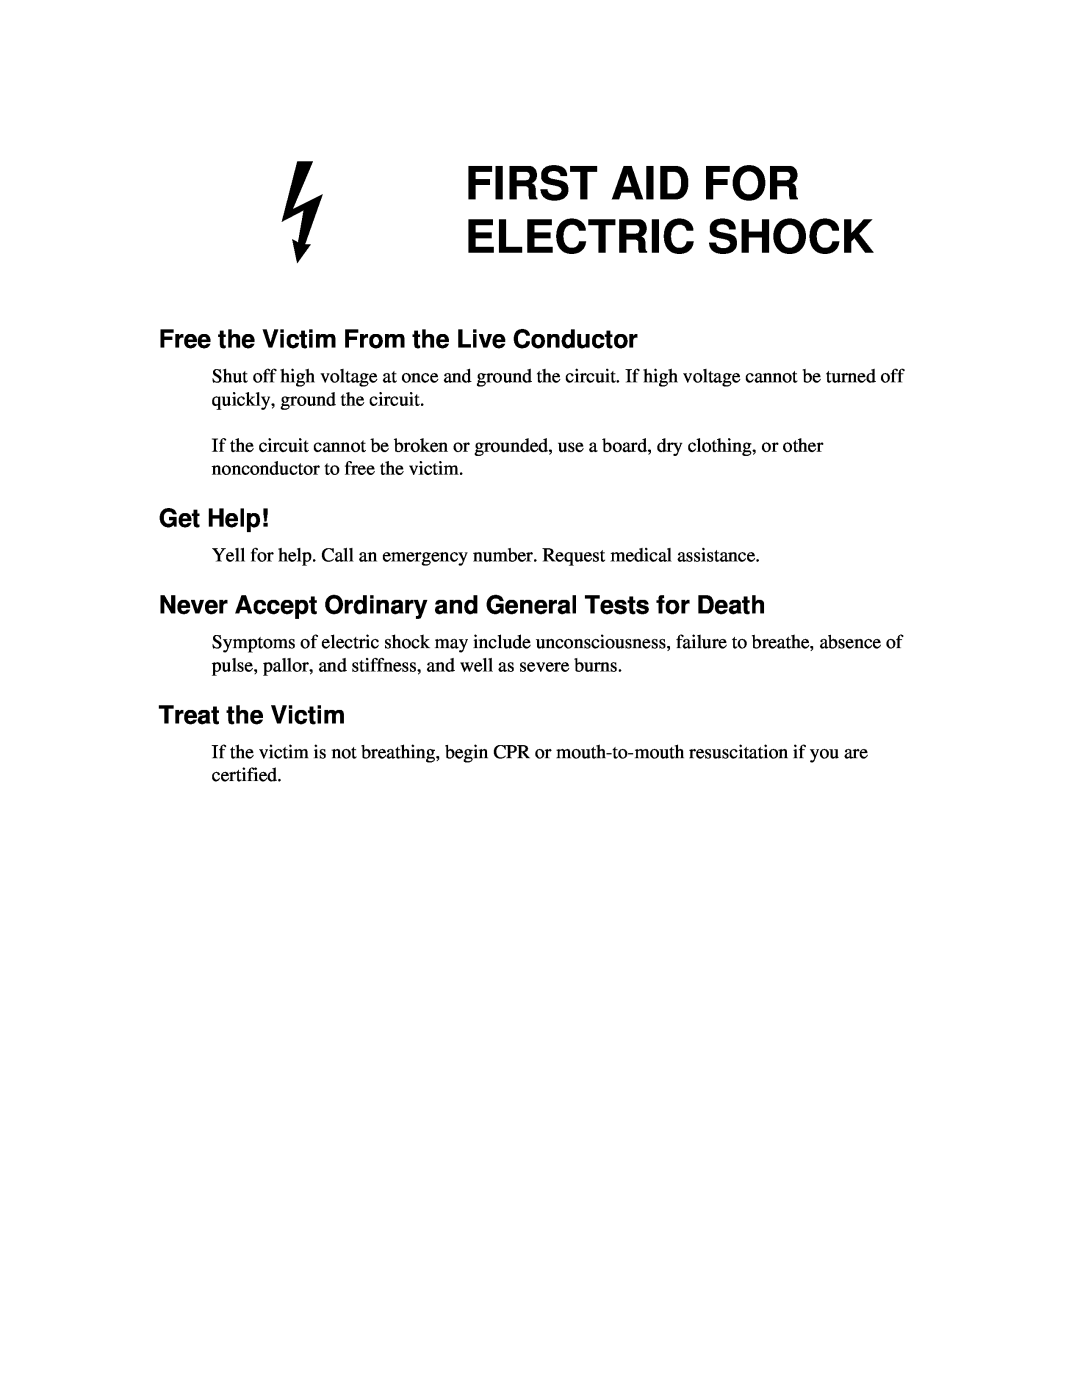 Fluke 5725A First Aid For Electric Shock, Free the Victim From the Live Conductor, Get Help, Treat the Victim 